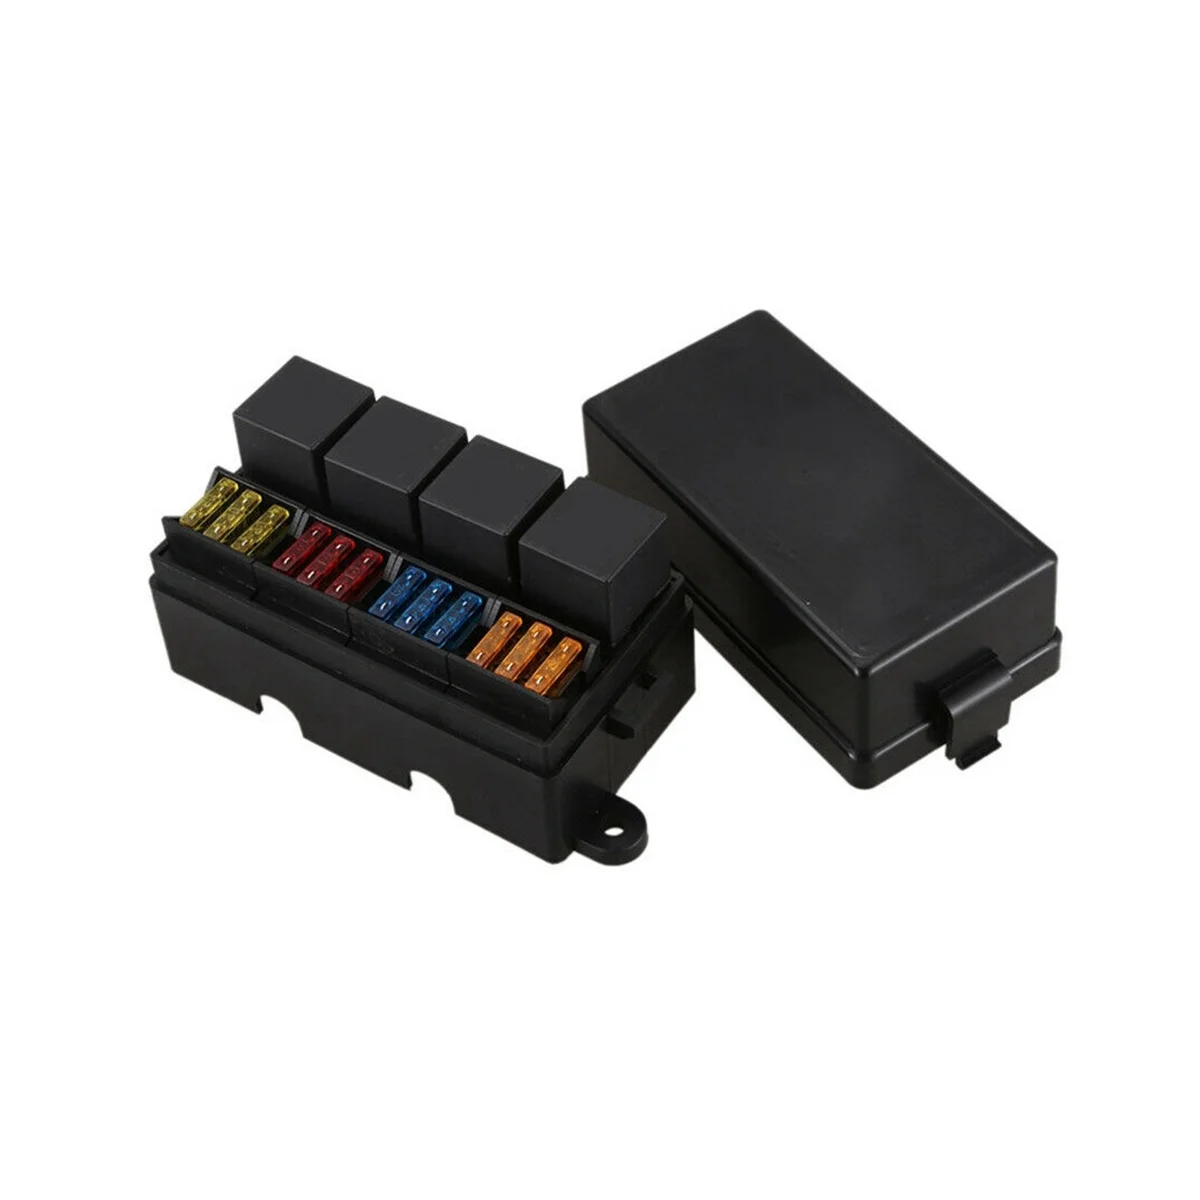 

12 Way Relay Fuse Block Holds Universal Waterproof Fuse Relay Box with 5 Relays and Metallic Pins Spade Terminals